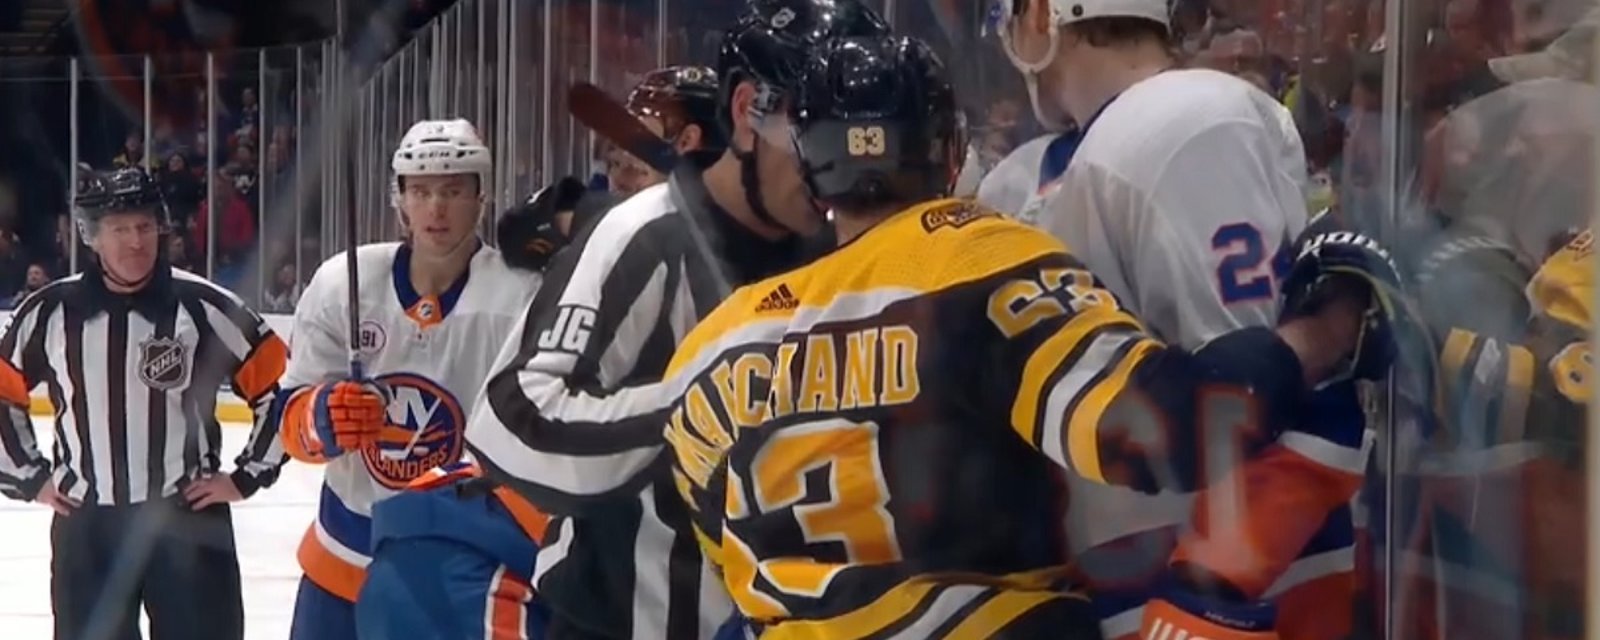 Tempers flare in Boston after more shenanigans between Marchand and Komarov.